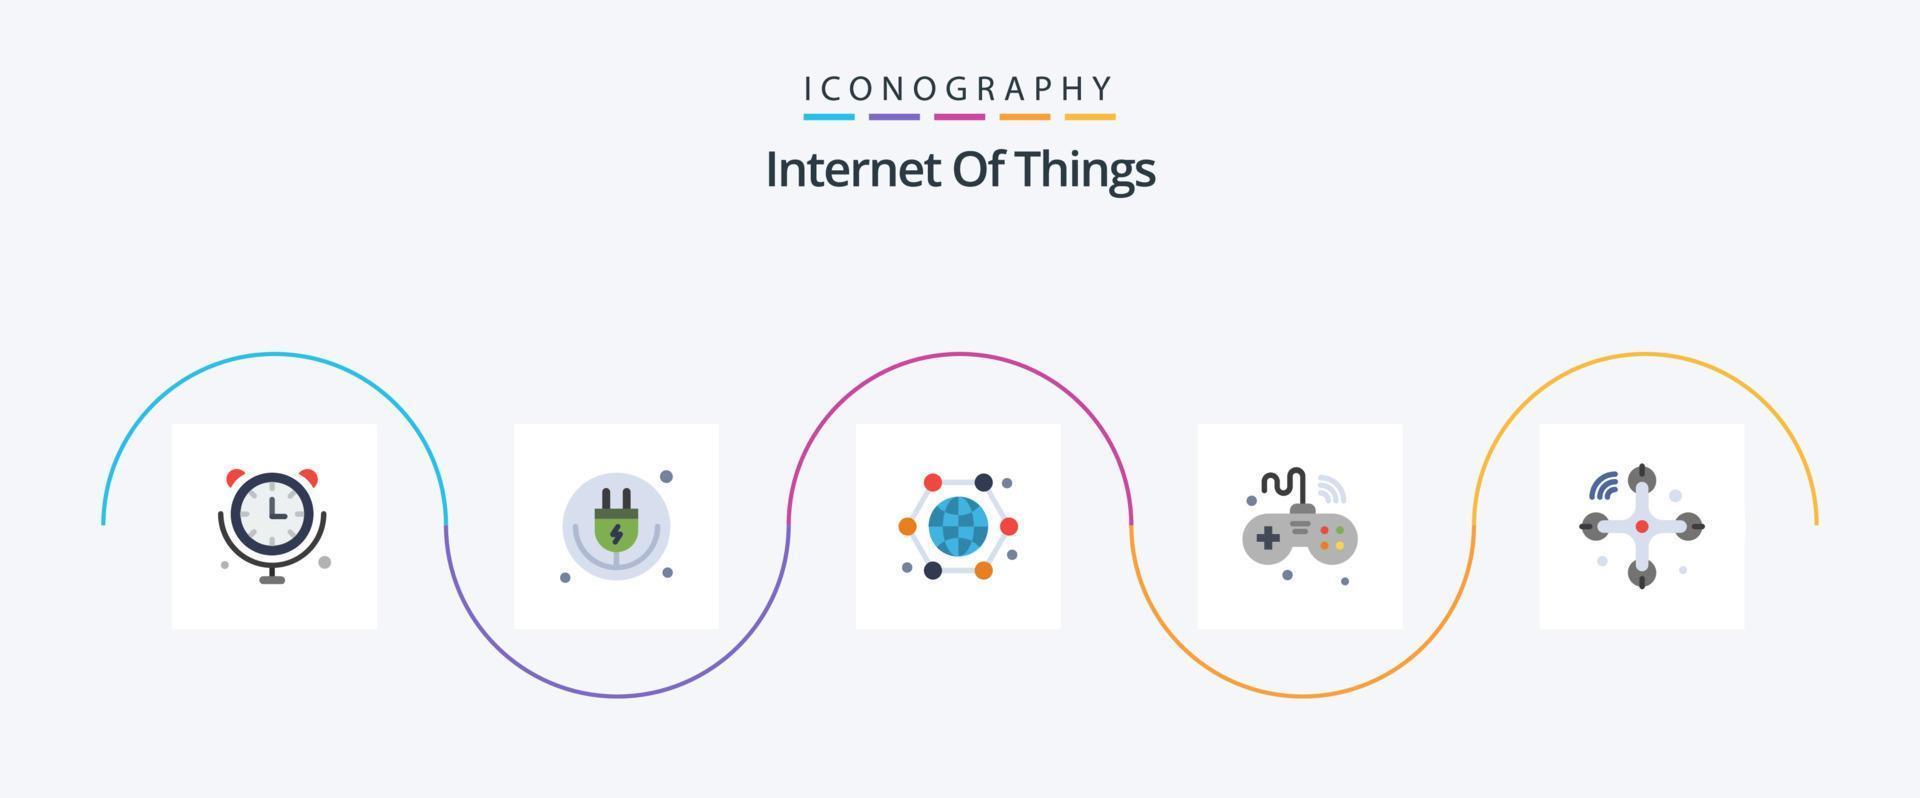 Internet Of Things Flat 5 Icon Pack Including things. internet. wifi. games. internet vector